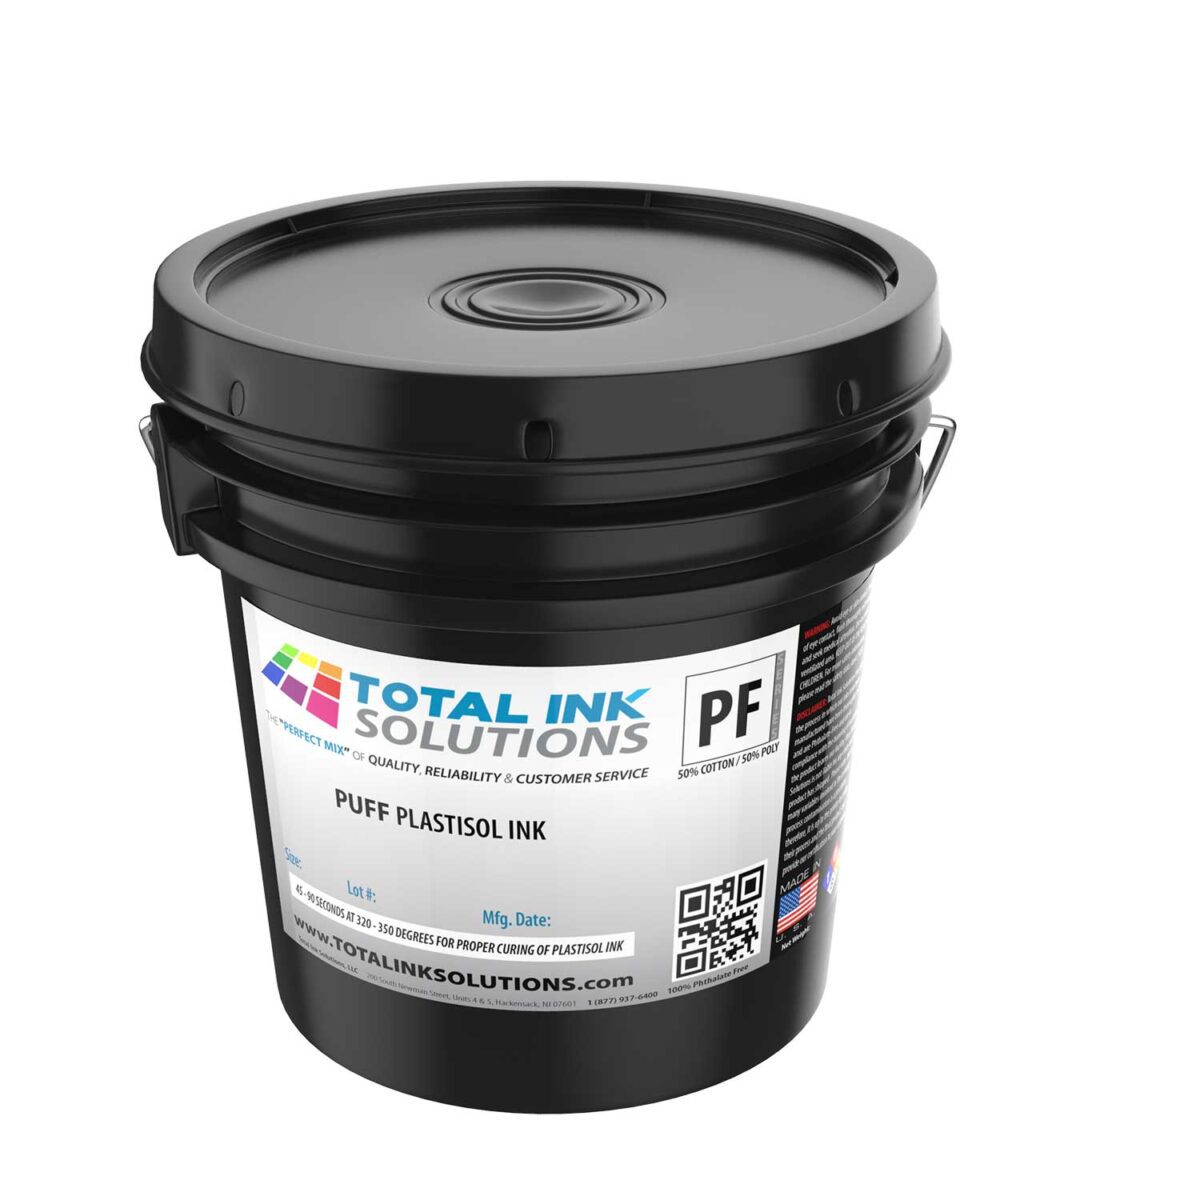 Puff Plastisol Ink - Gallon TOTAL INK SOLUTIONS®